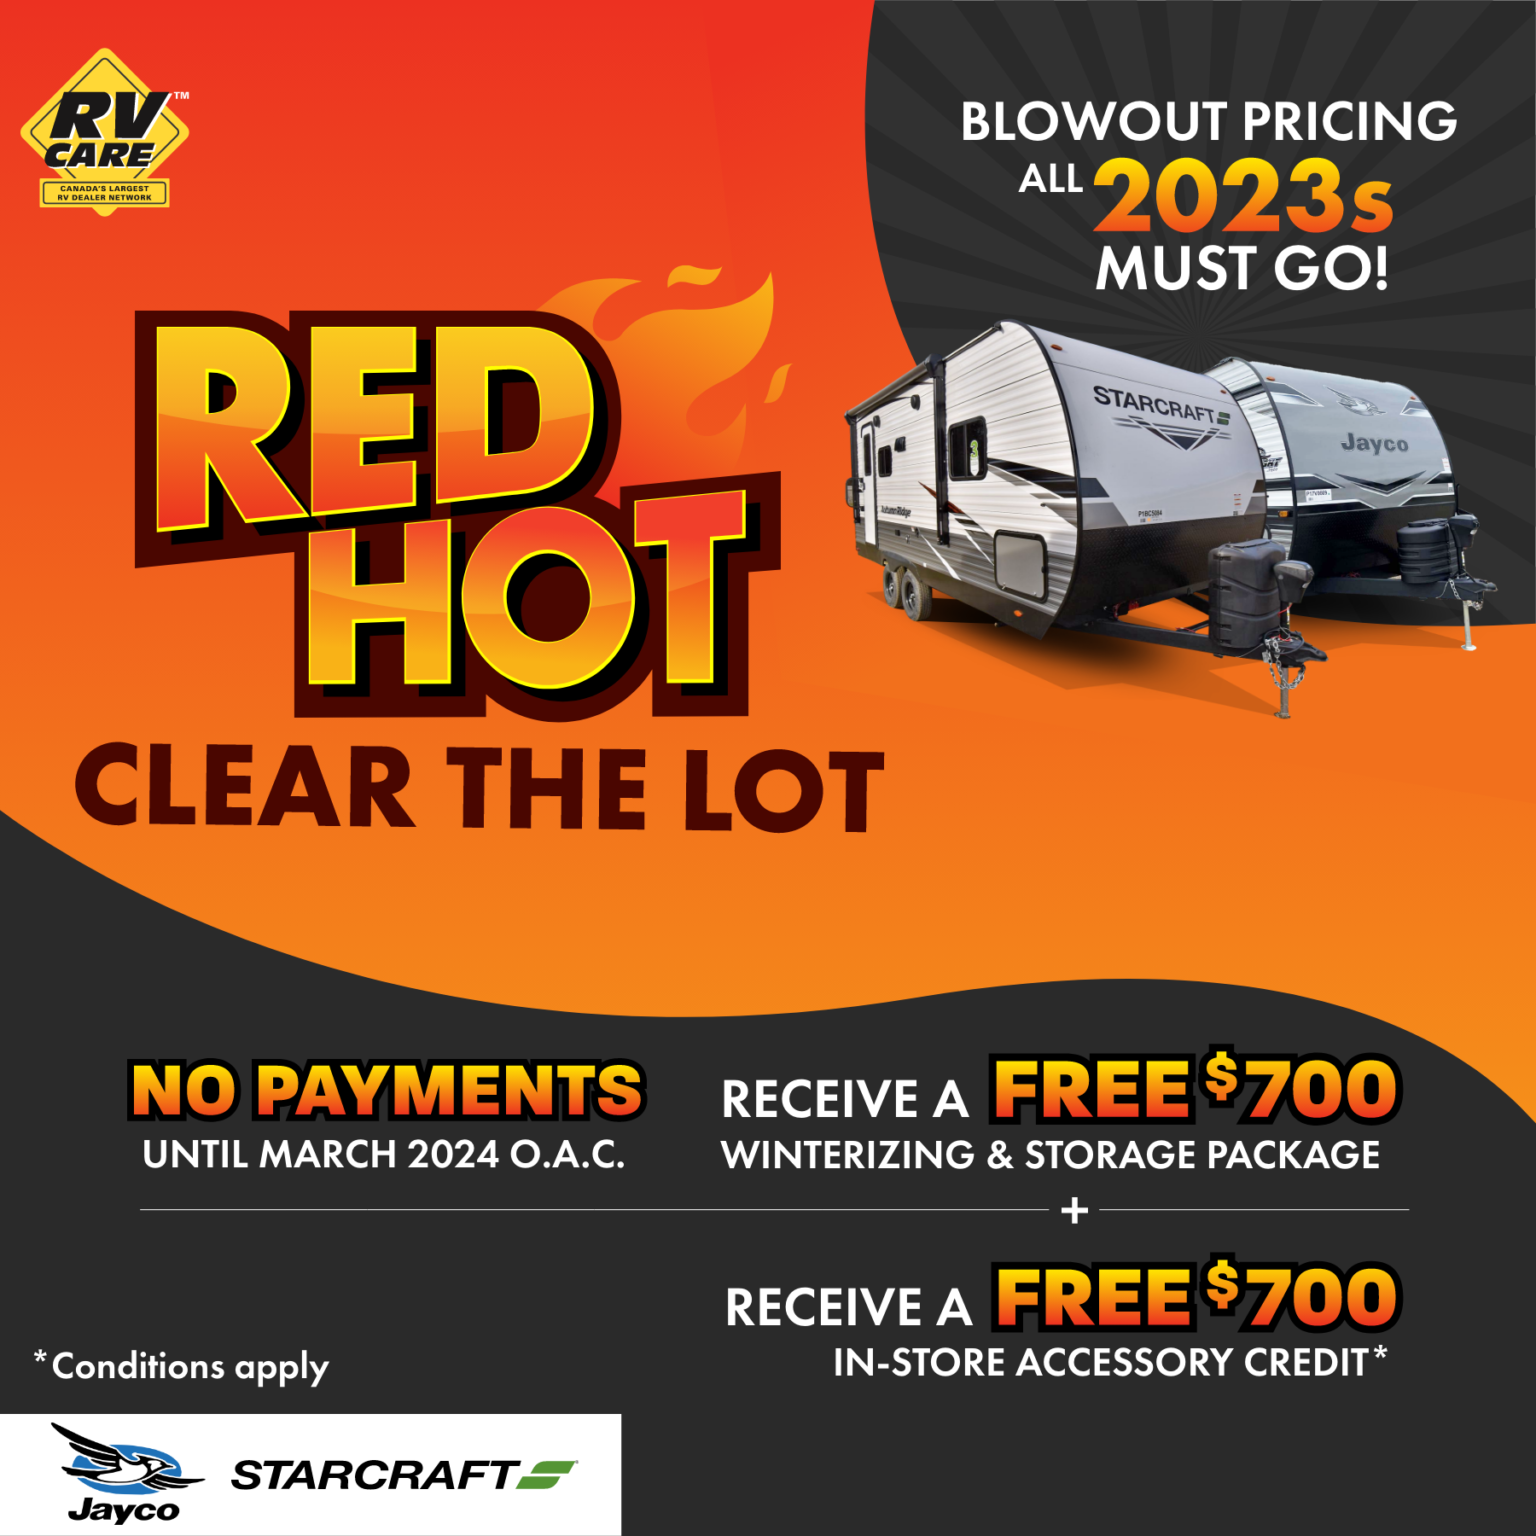 Red Hot Clear the Lot RV Sale